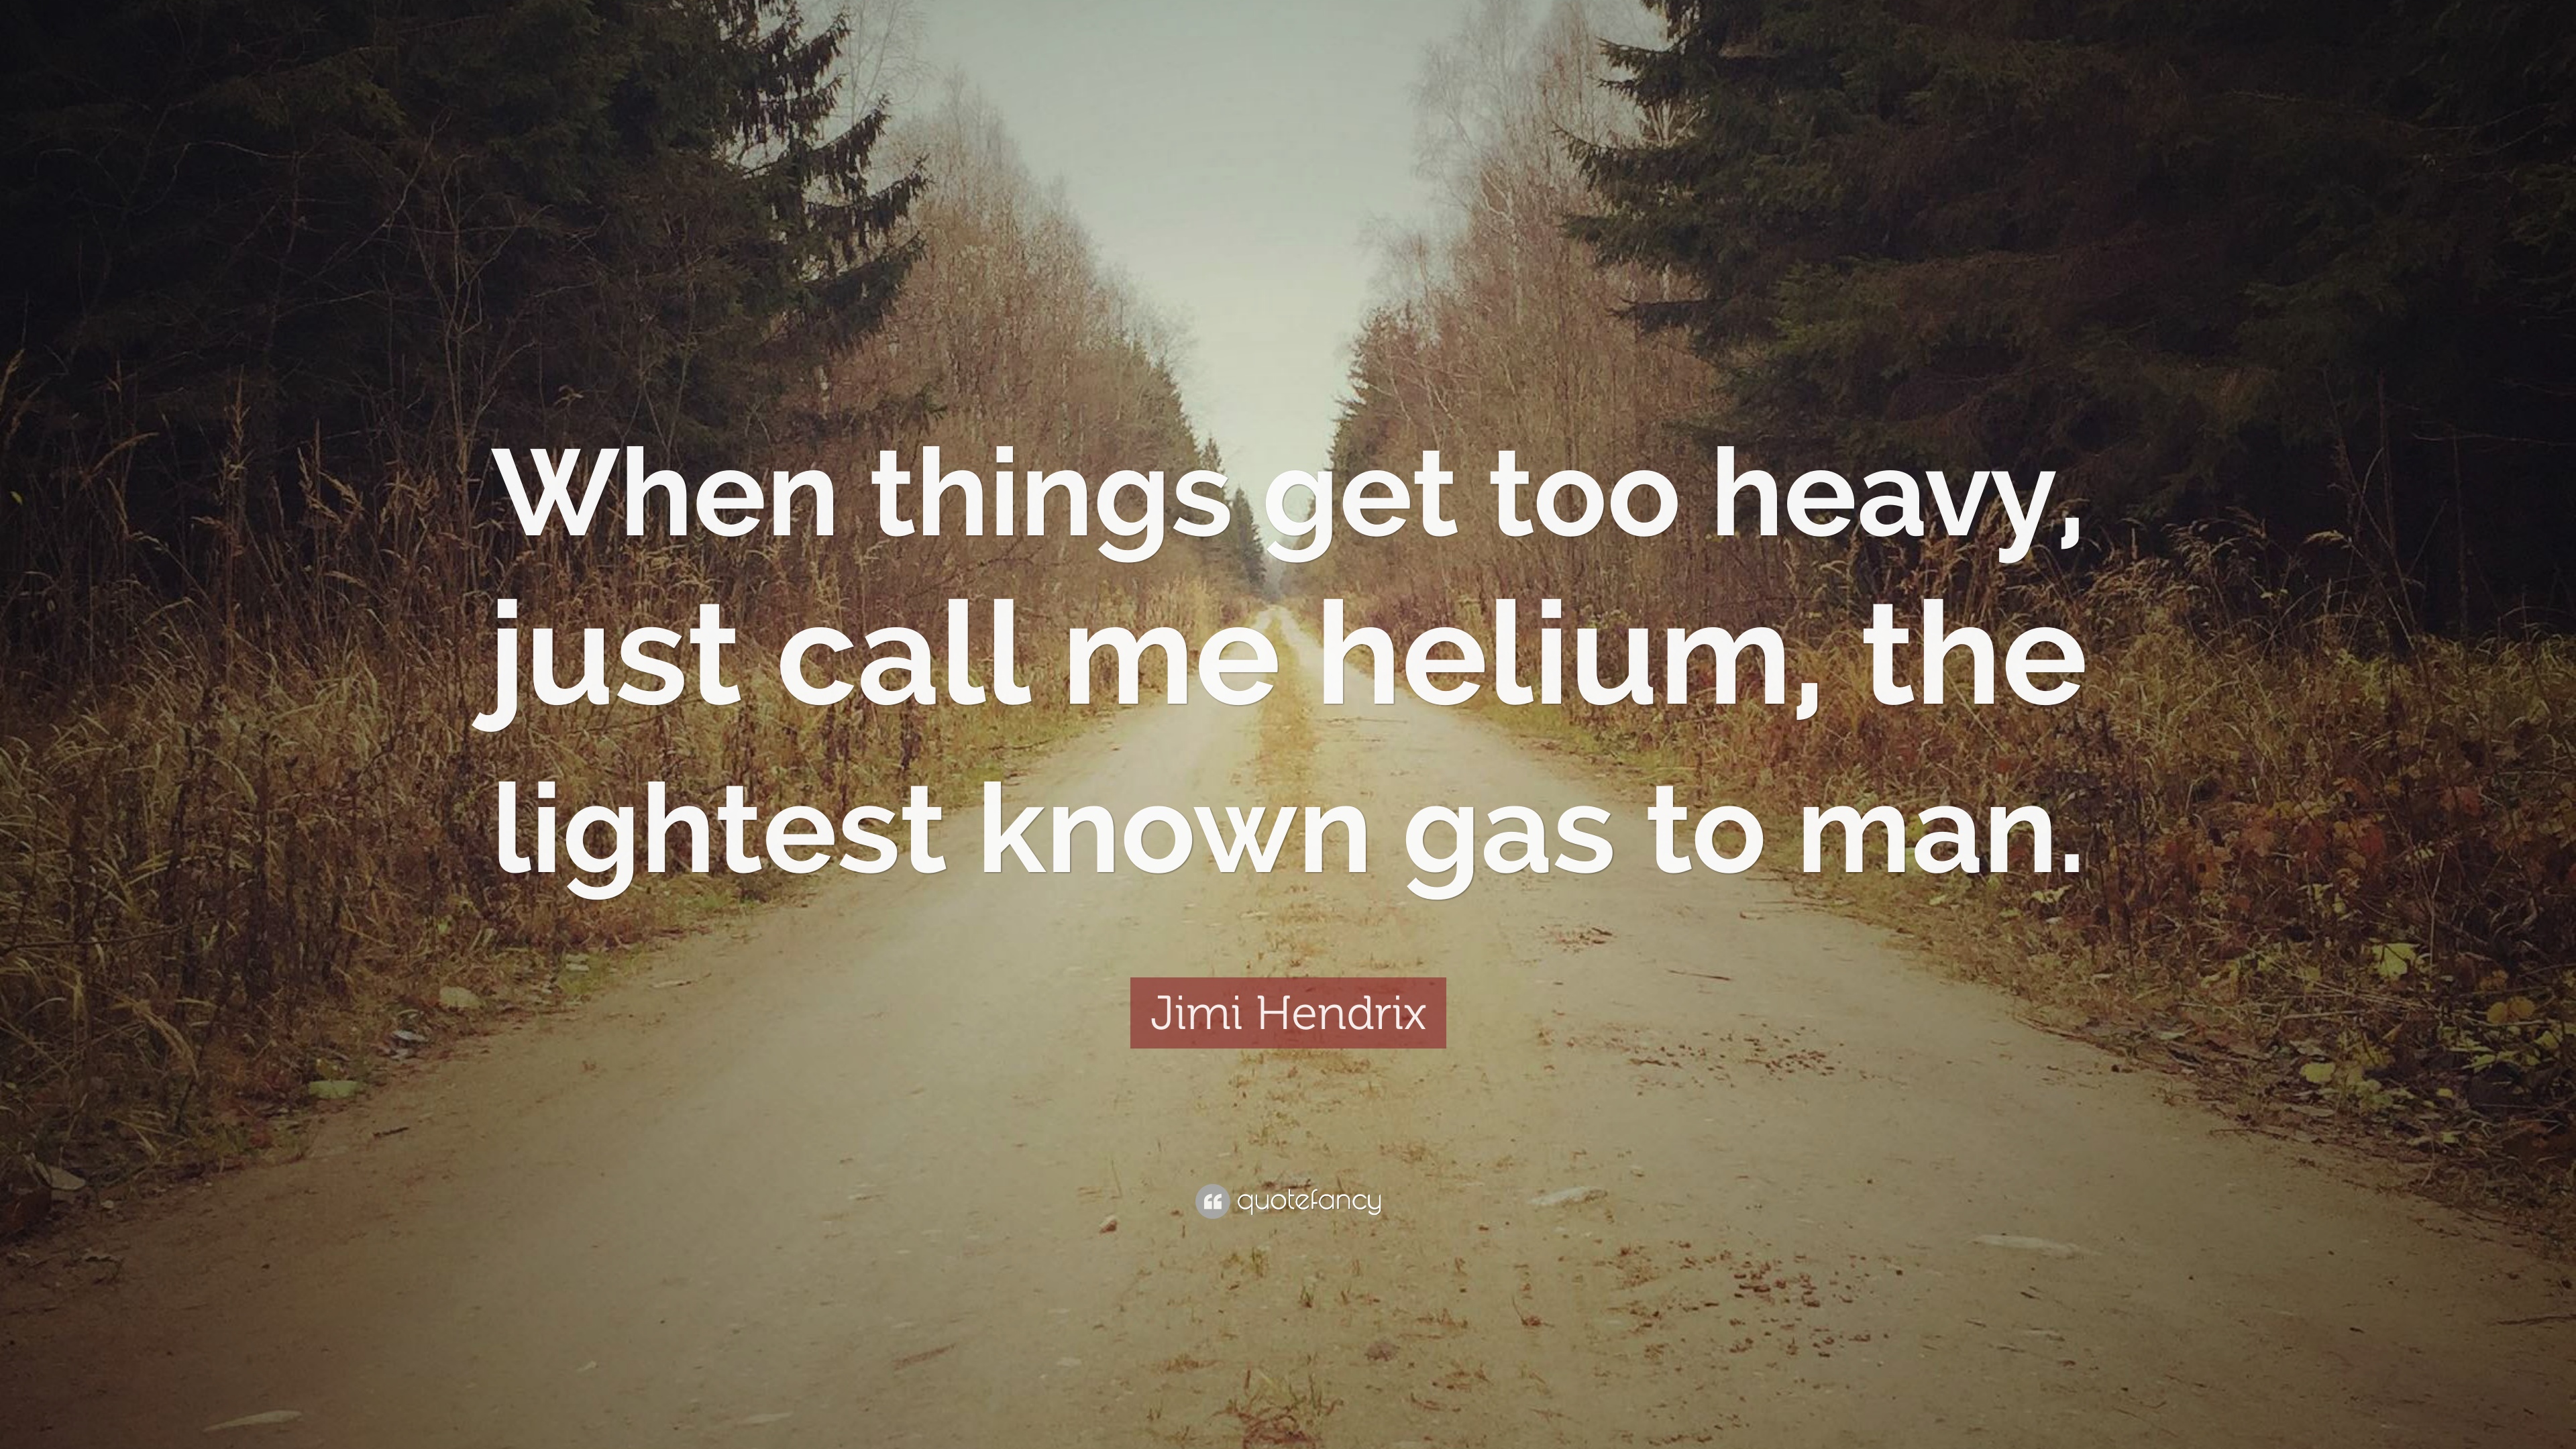 Jimi Hendrix Quote: “When things get too heavy, just call me helium